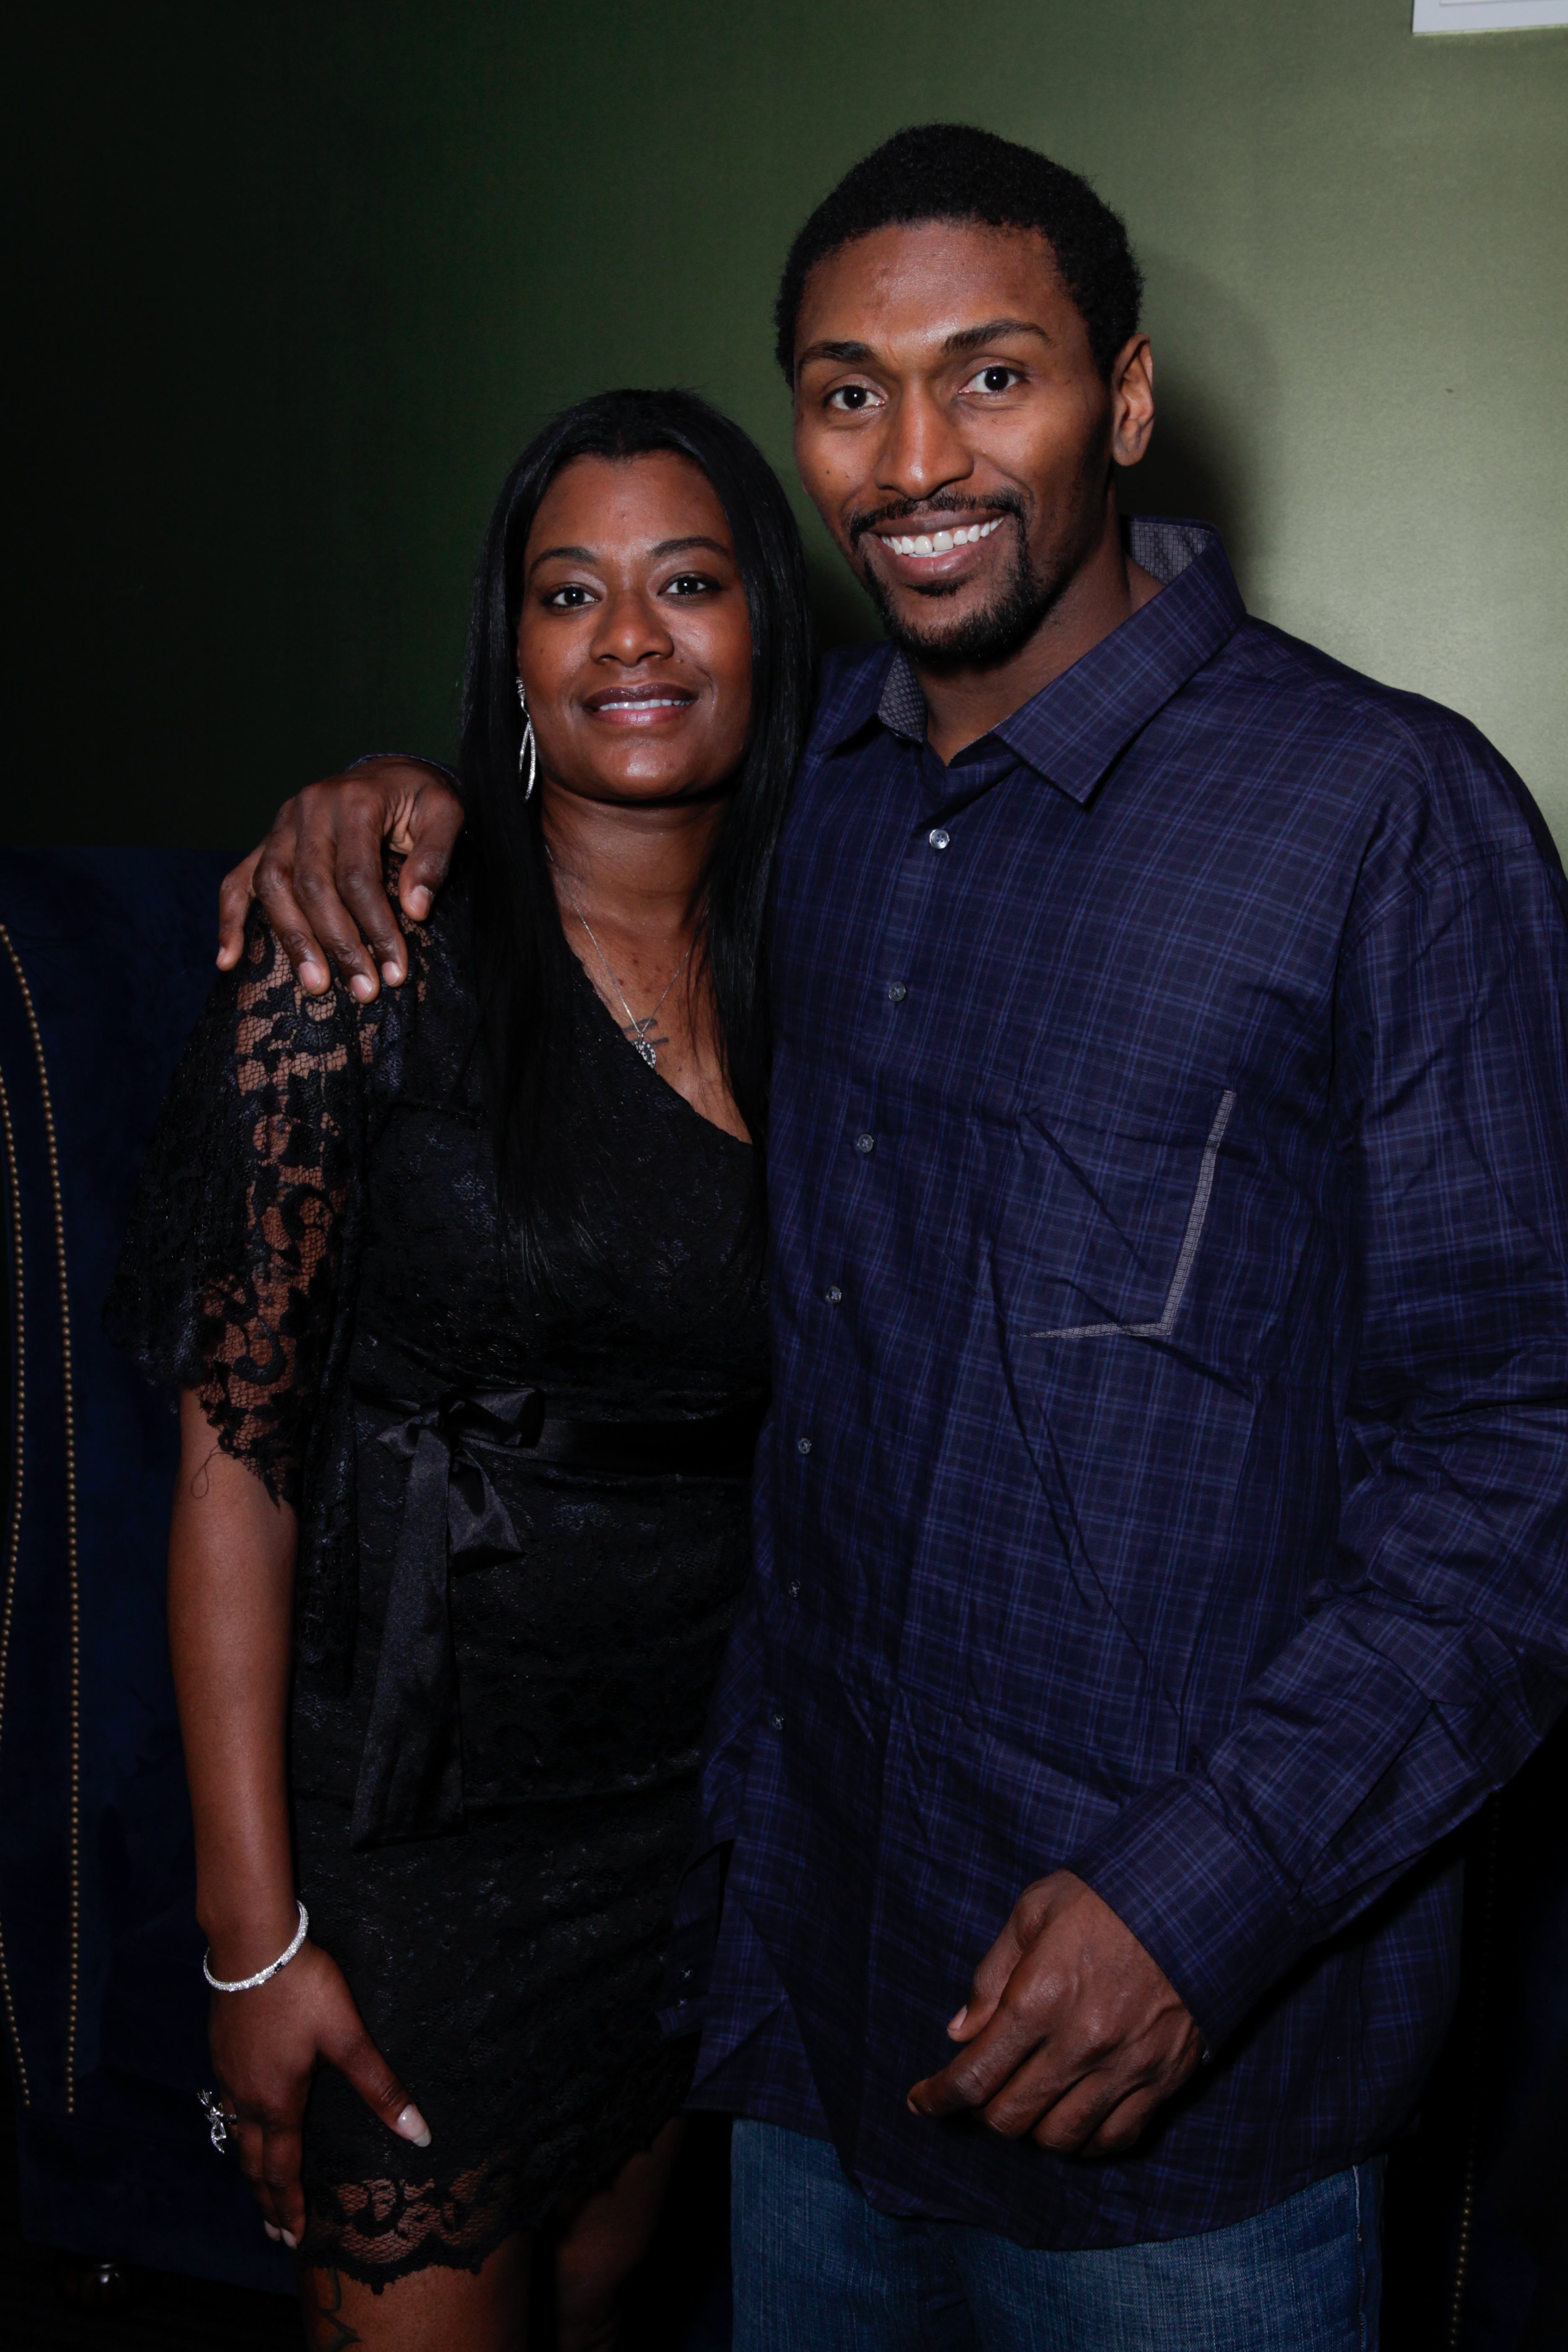 Kimsha Artest and Metta World Peace attend Ron Artest's Birthday Celebration at The Conga Room at L.A. Live on November 14, 2010, in Los Angeles, California. | Source: Getty Images